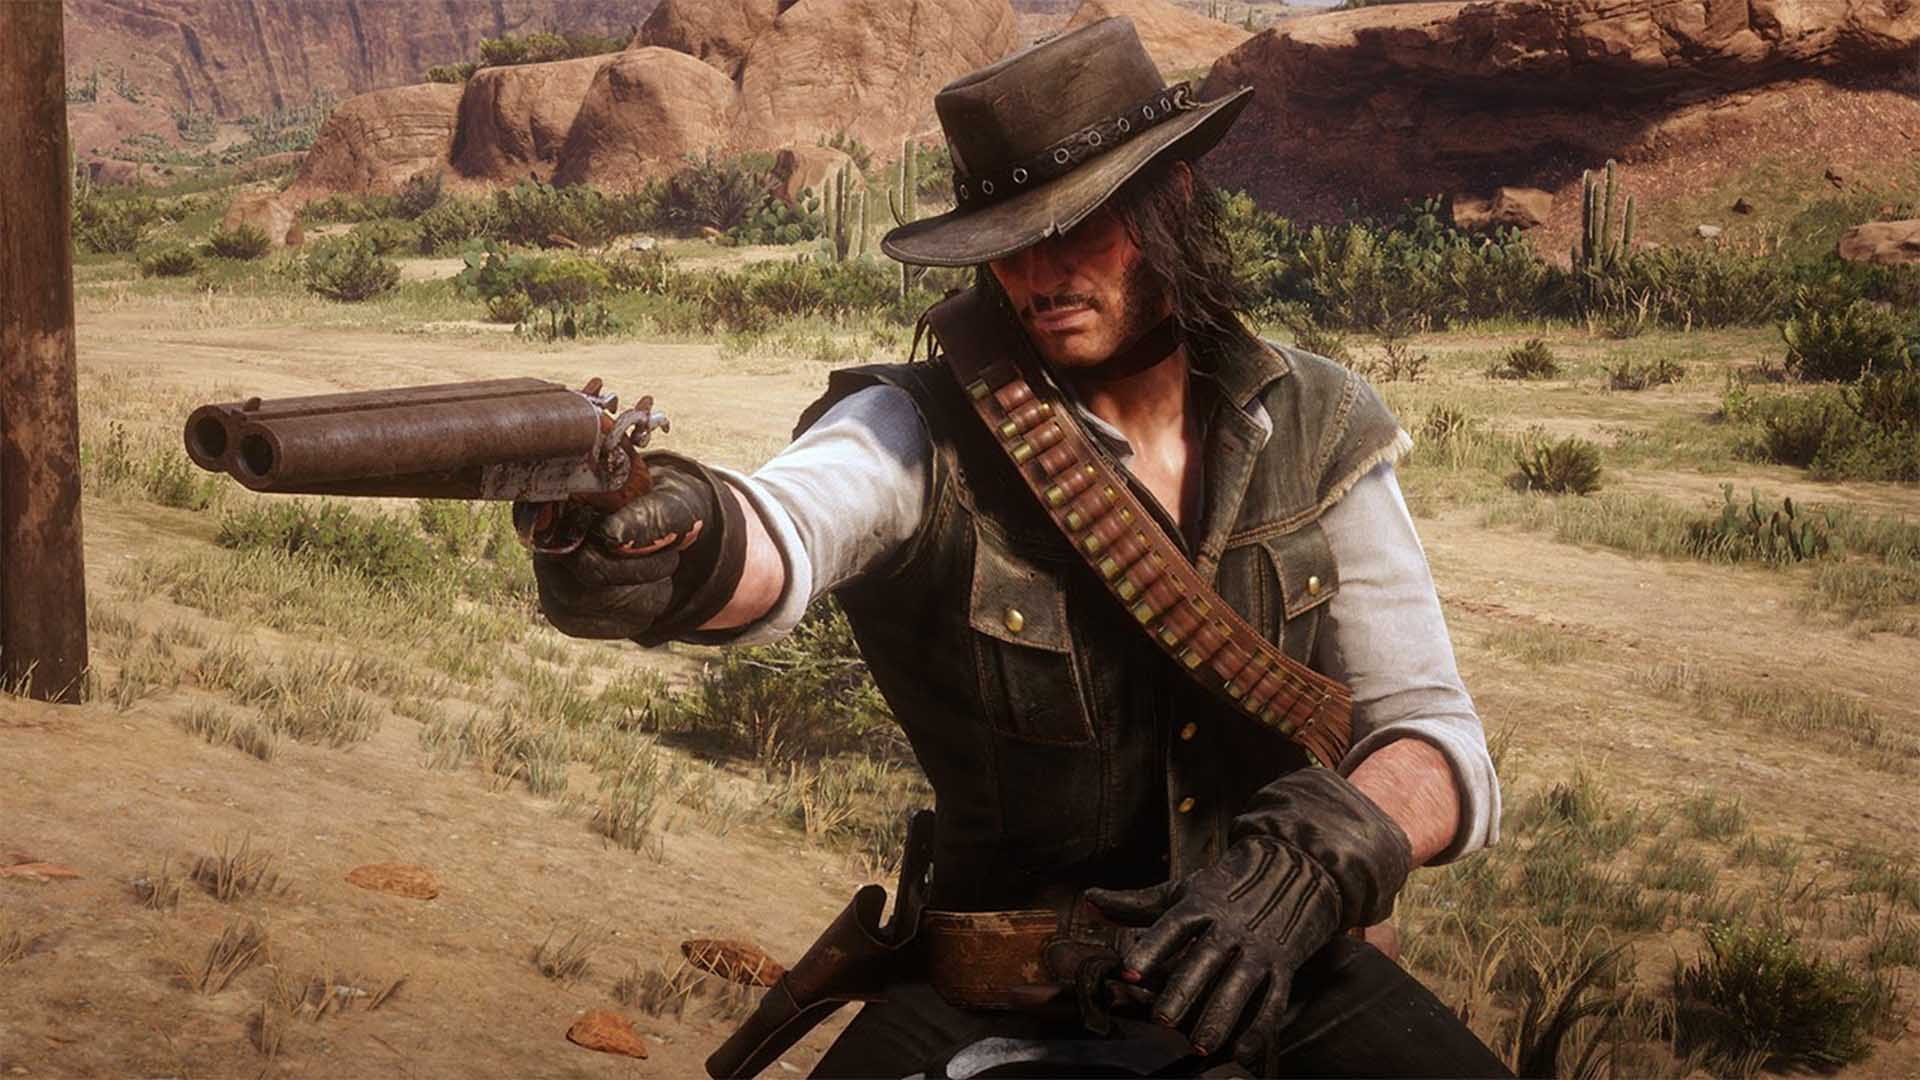 Red Dead Redemption Remaster on X: time to bring out this bad boy again 😉  this is a mock-up i made in photoshop a while ago. edited john to resemble  RDR2's art